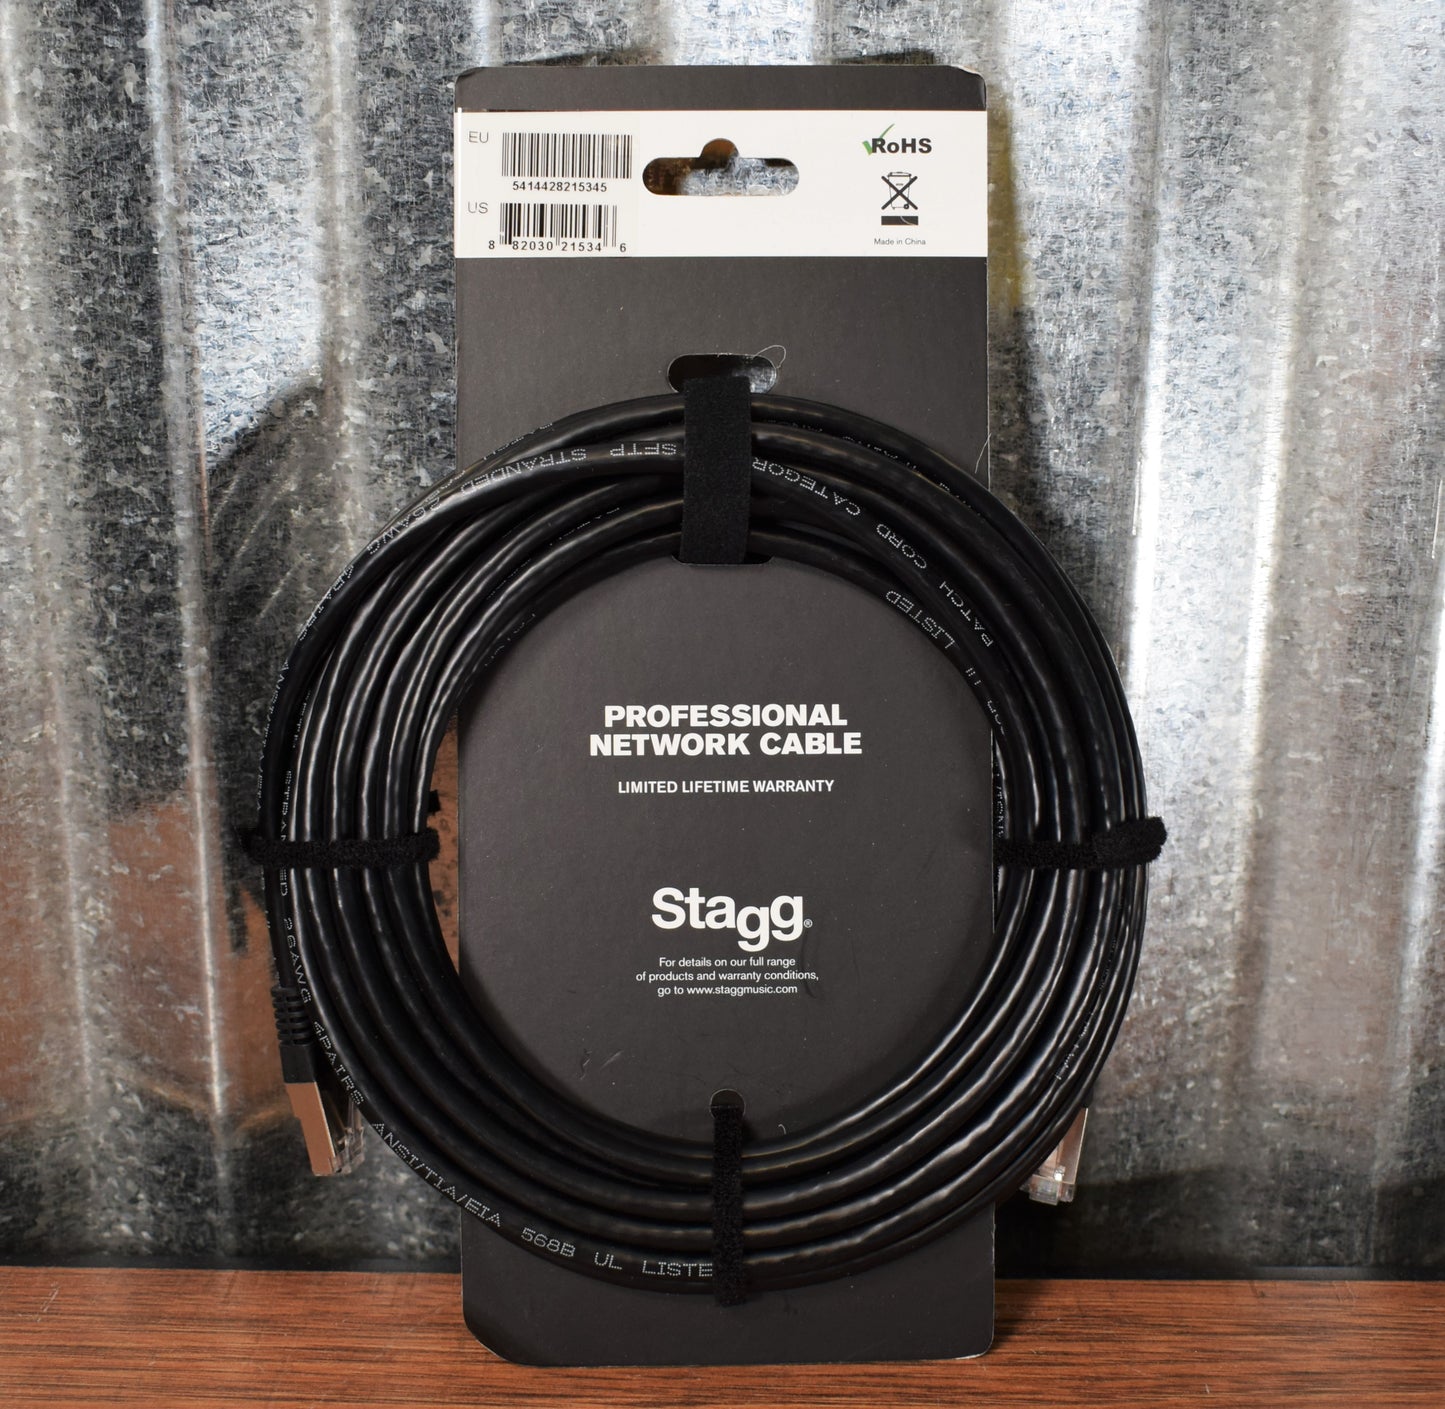 Stagg NCC10RJ 10m 33ft CAT6 SFTP RJ45 Cable